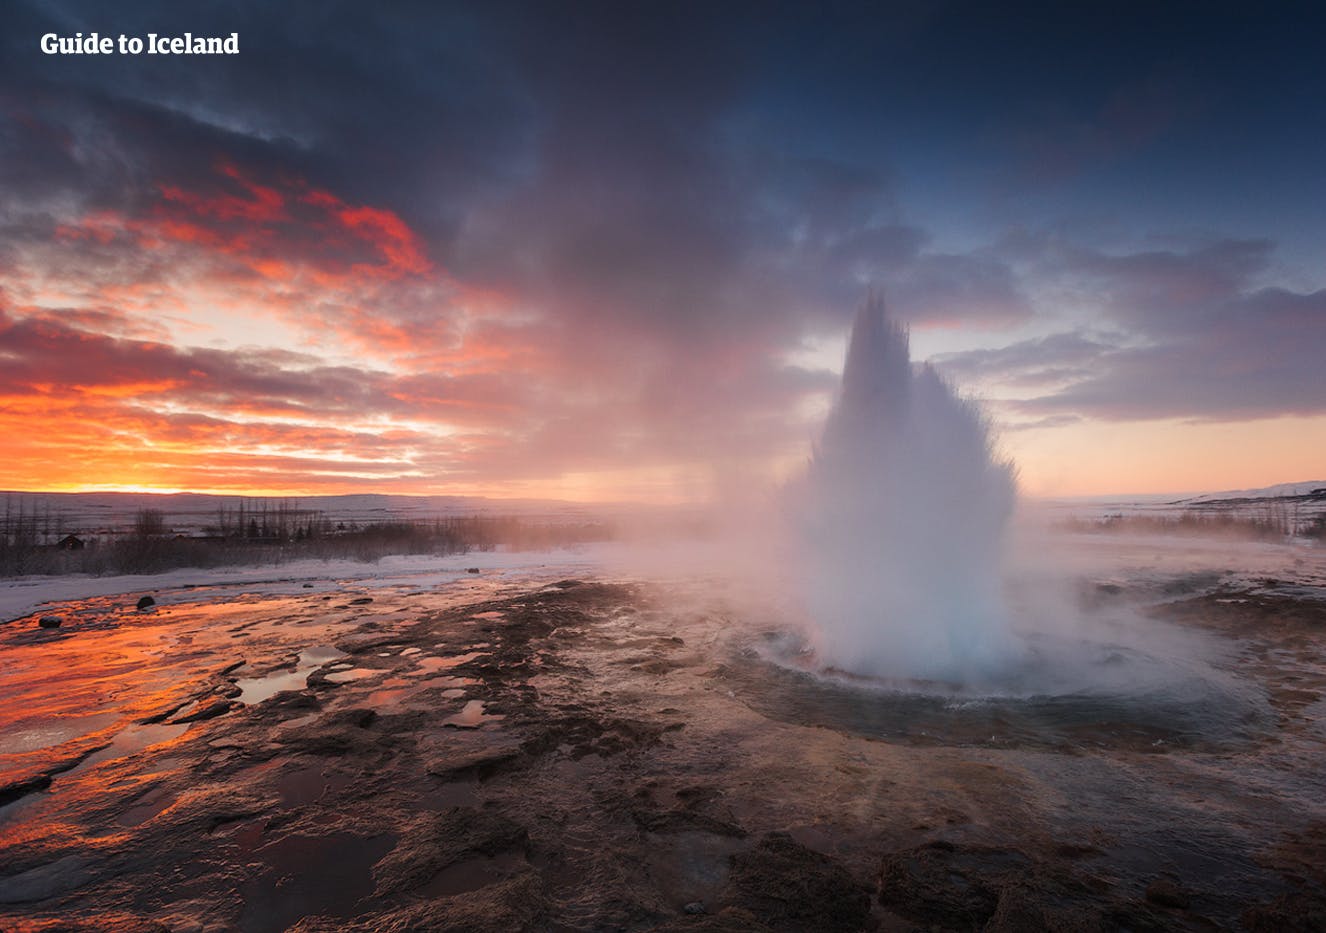 Watch the geyser Strokkur erupt as you travel the Golden Circle on a self-drive tour.